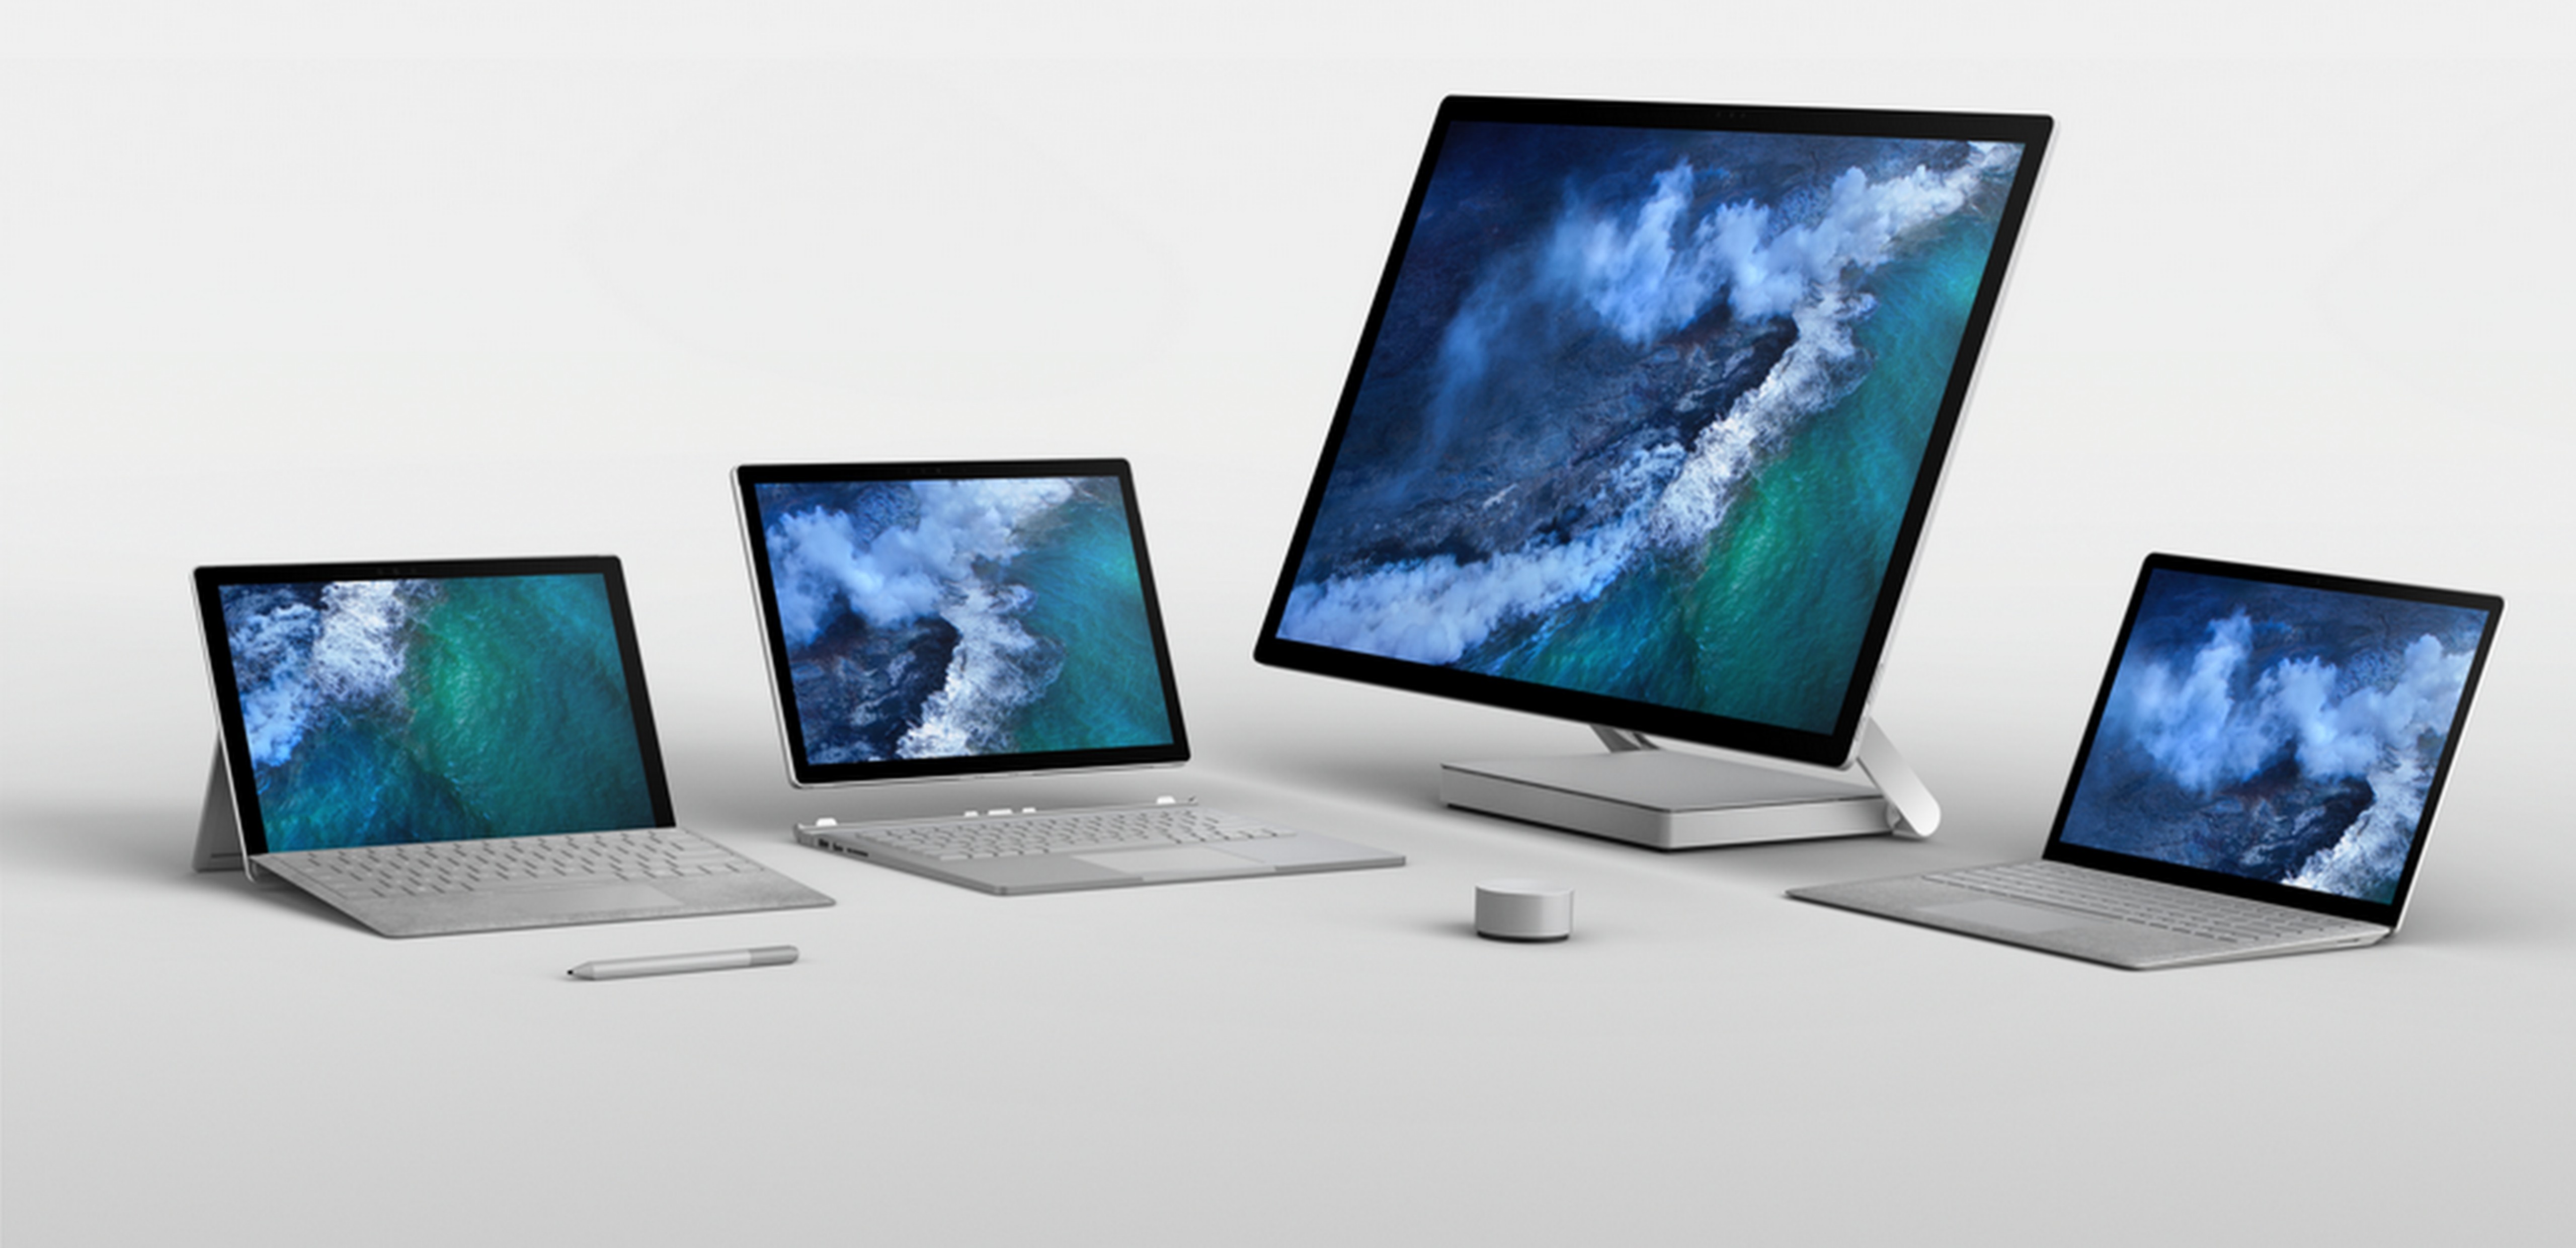 Surface family device shot, from left to right shown, the new Surface Pro, Surface Book, Surface Studio, and Surface Laptop in Platinum color.